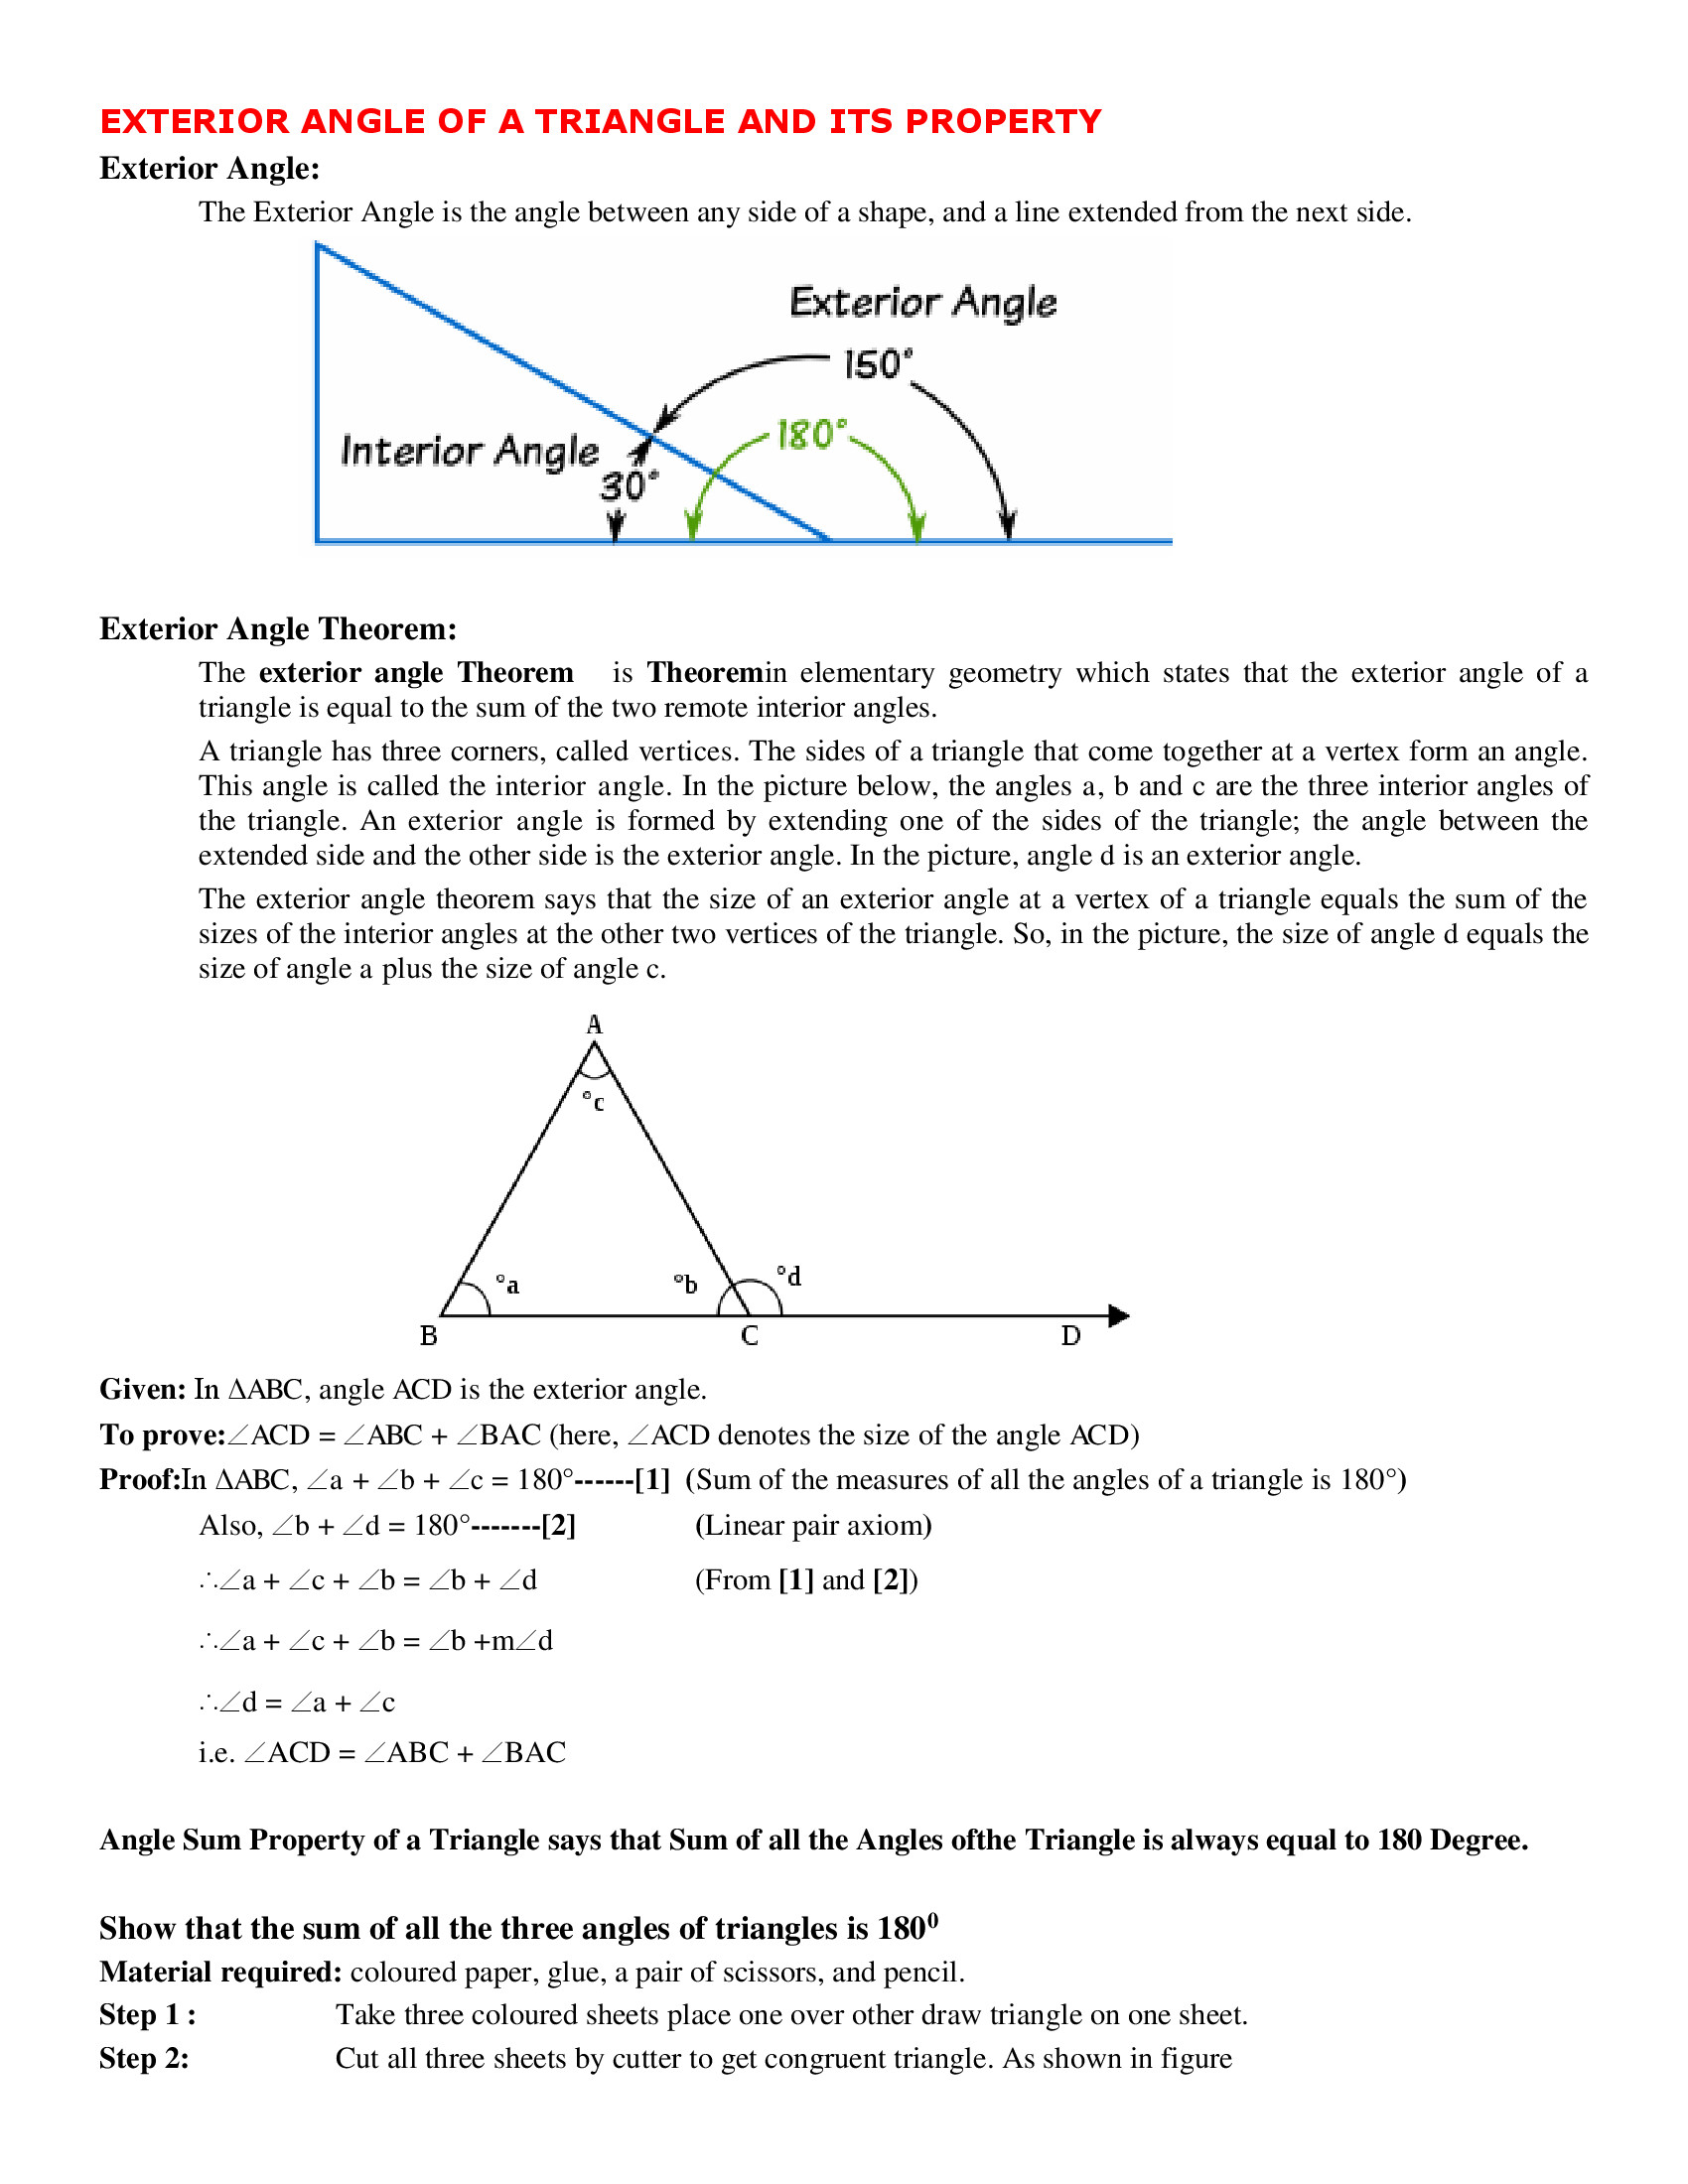 Exterior Angle theorem Worksheet Exterior Angle Of A Triangle and Its Property Worksheet